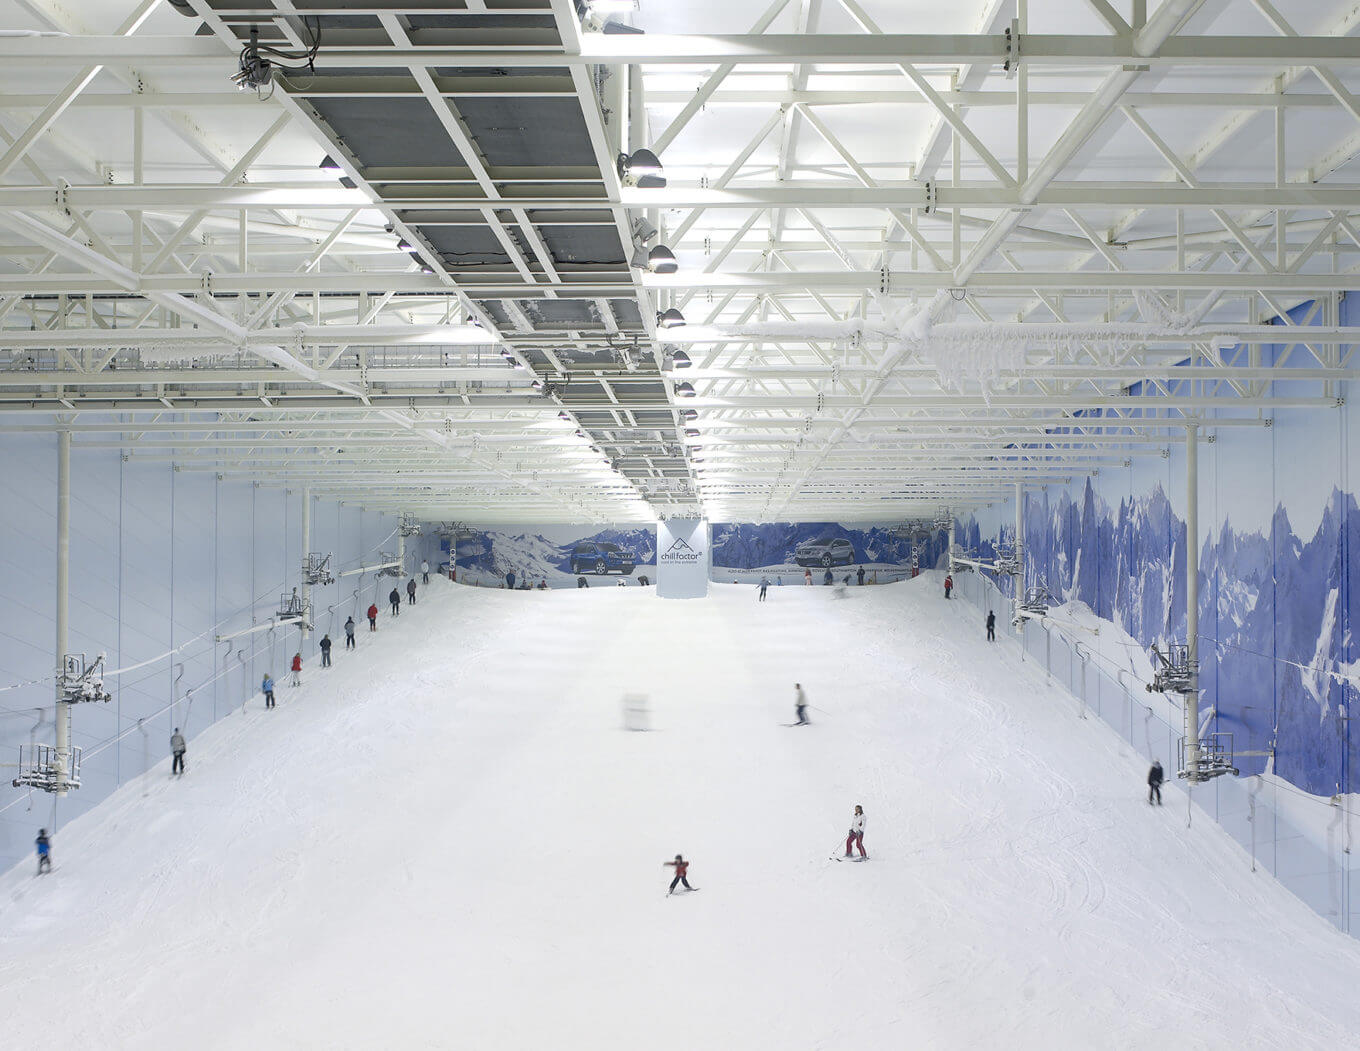 Chill Factore indoor snow centre in Manchester, UK